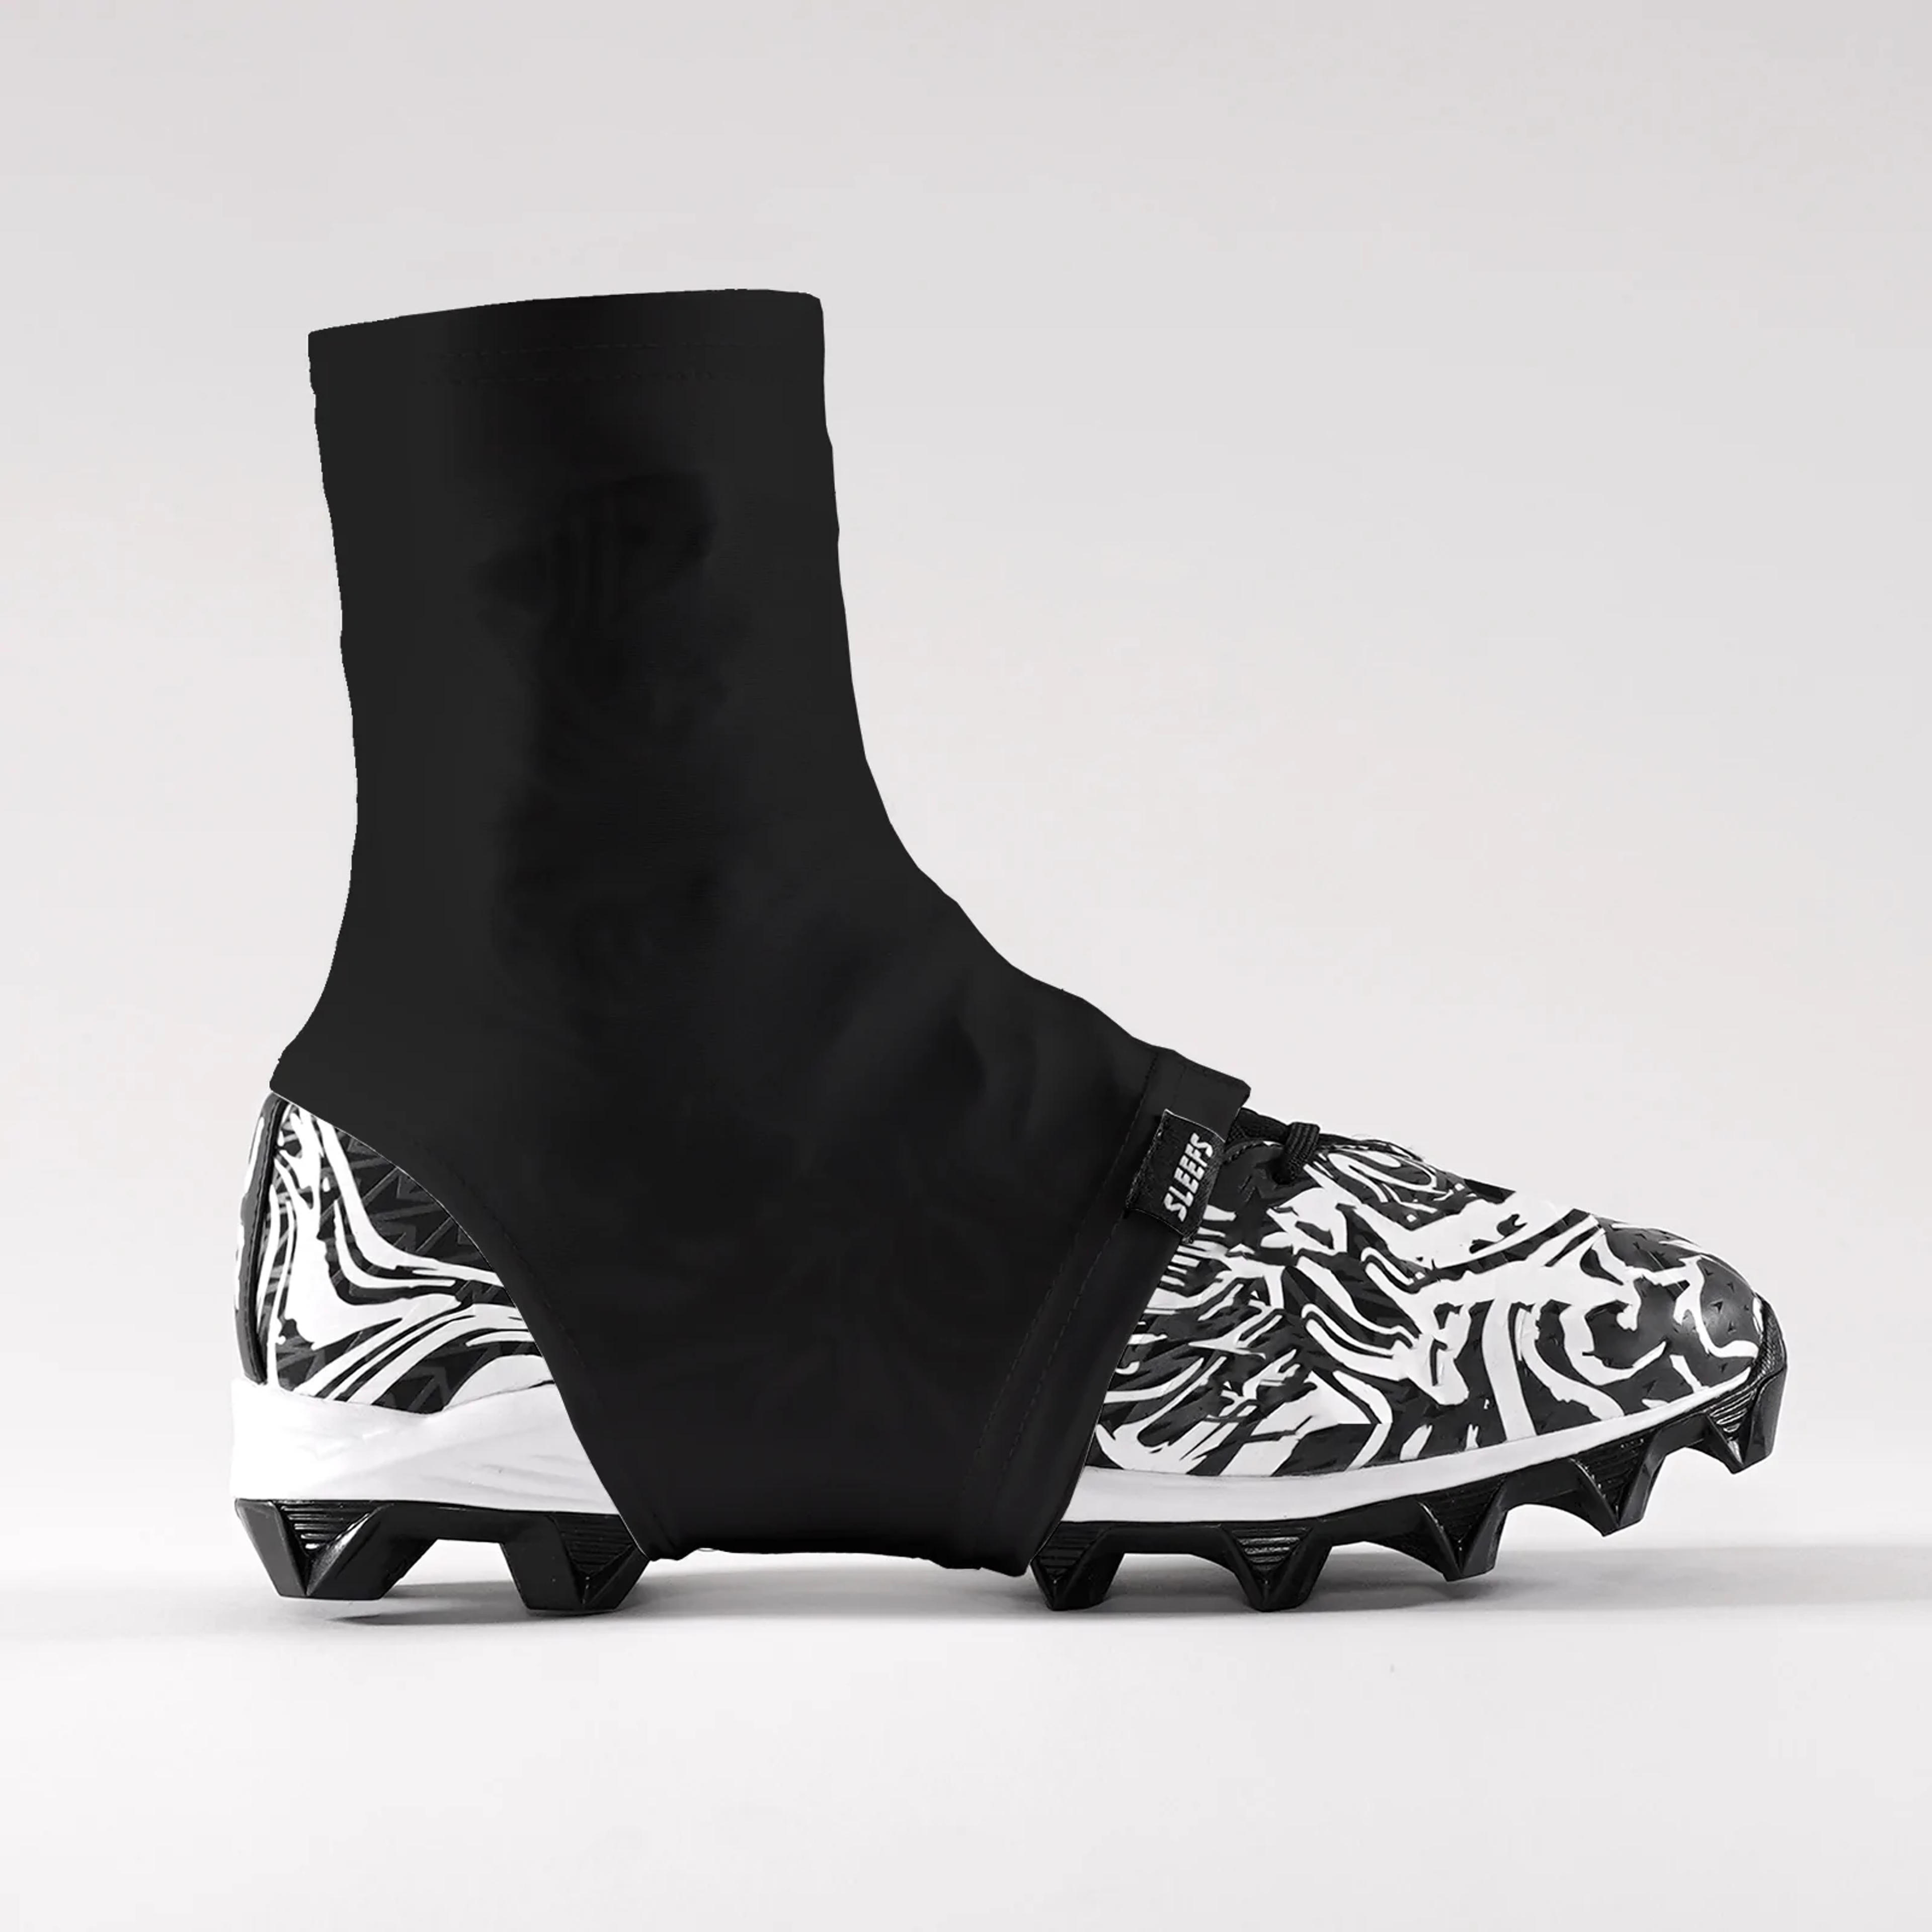 Basic Black Kids Spats / Cleat Covers - Y / Black